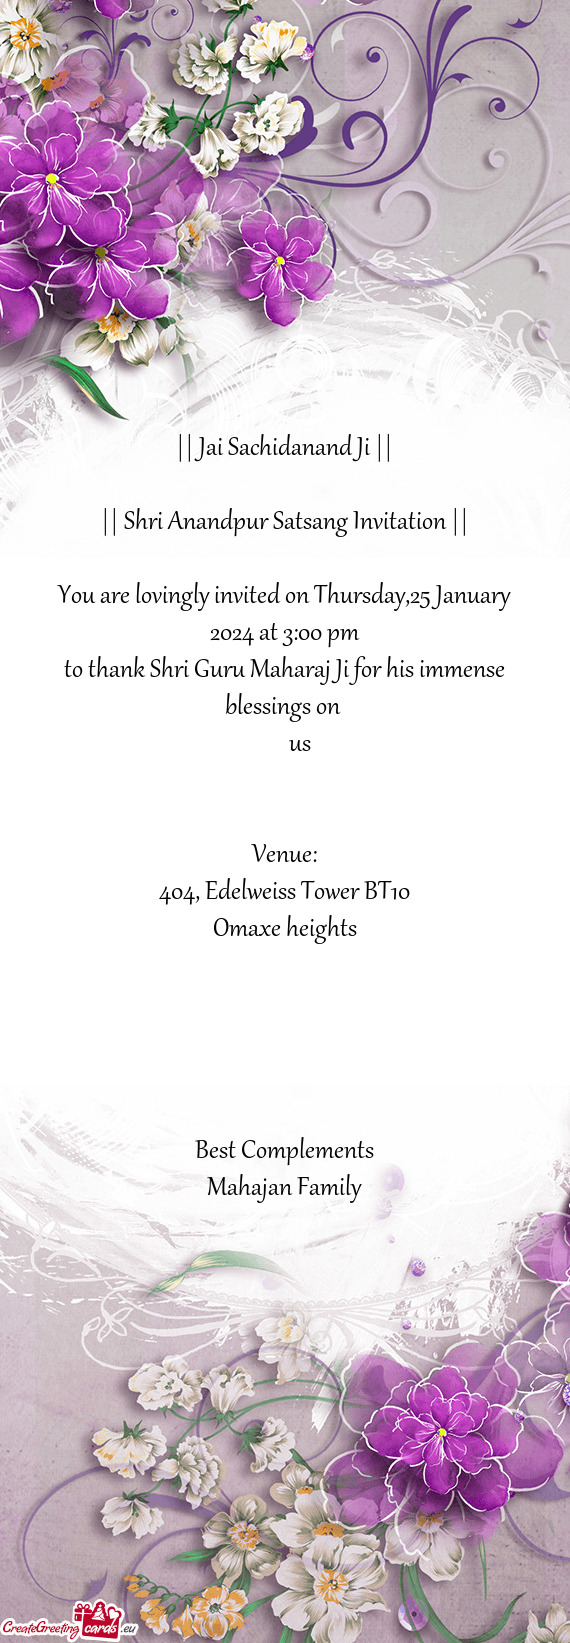 You are lovingly invited on Thursday,25 January 2024 at 3:00 pm